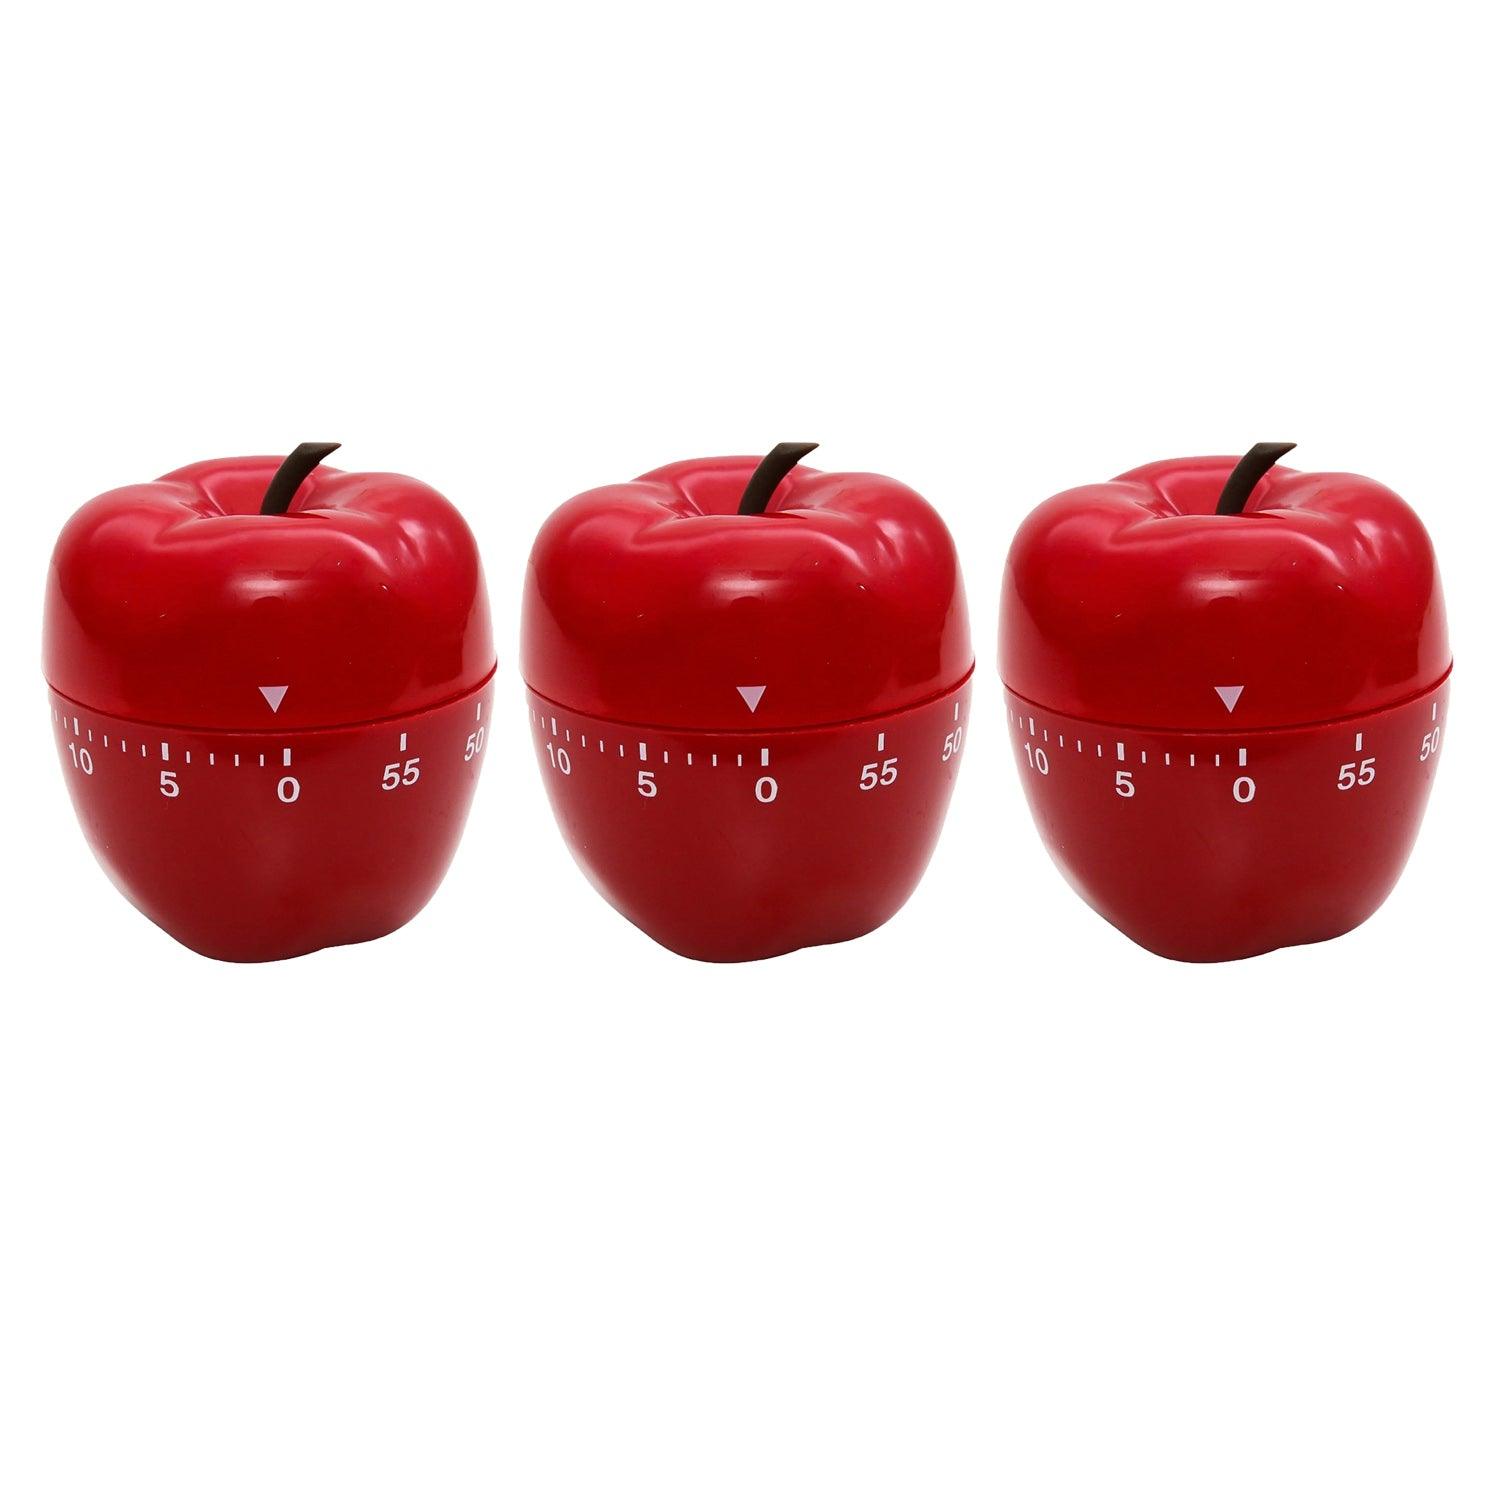 Apple-Shaped Timer, Red, Pack of 3 - Loomini